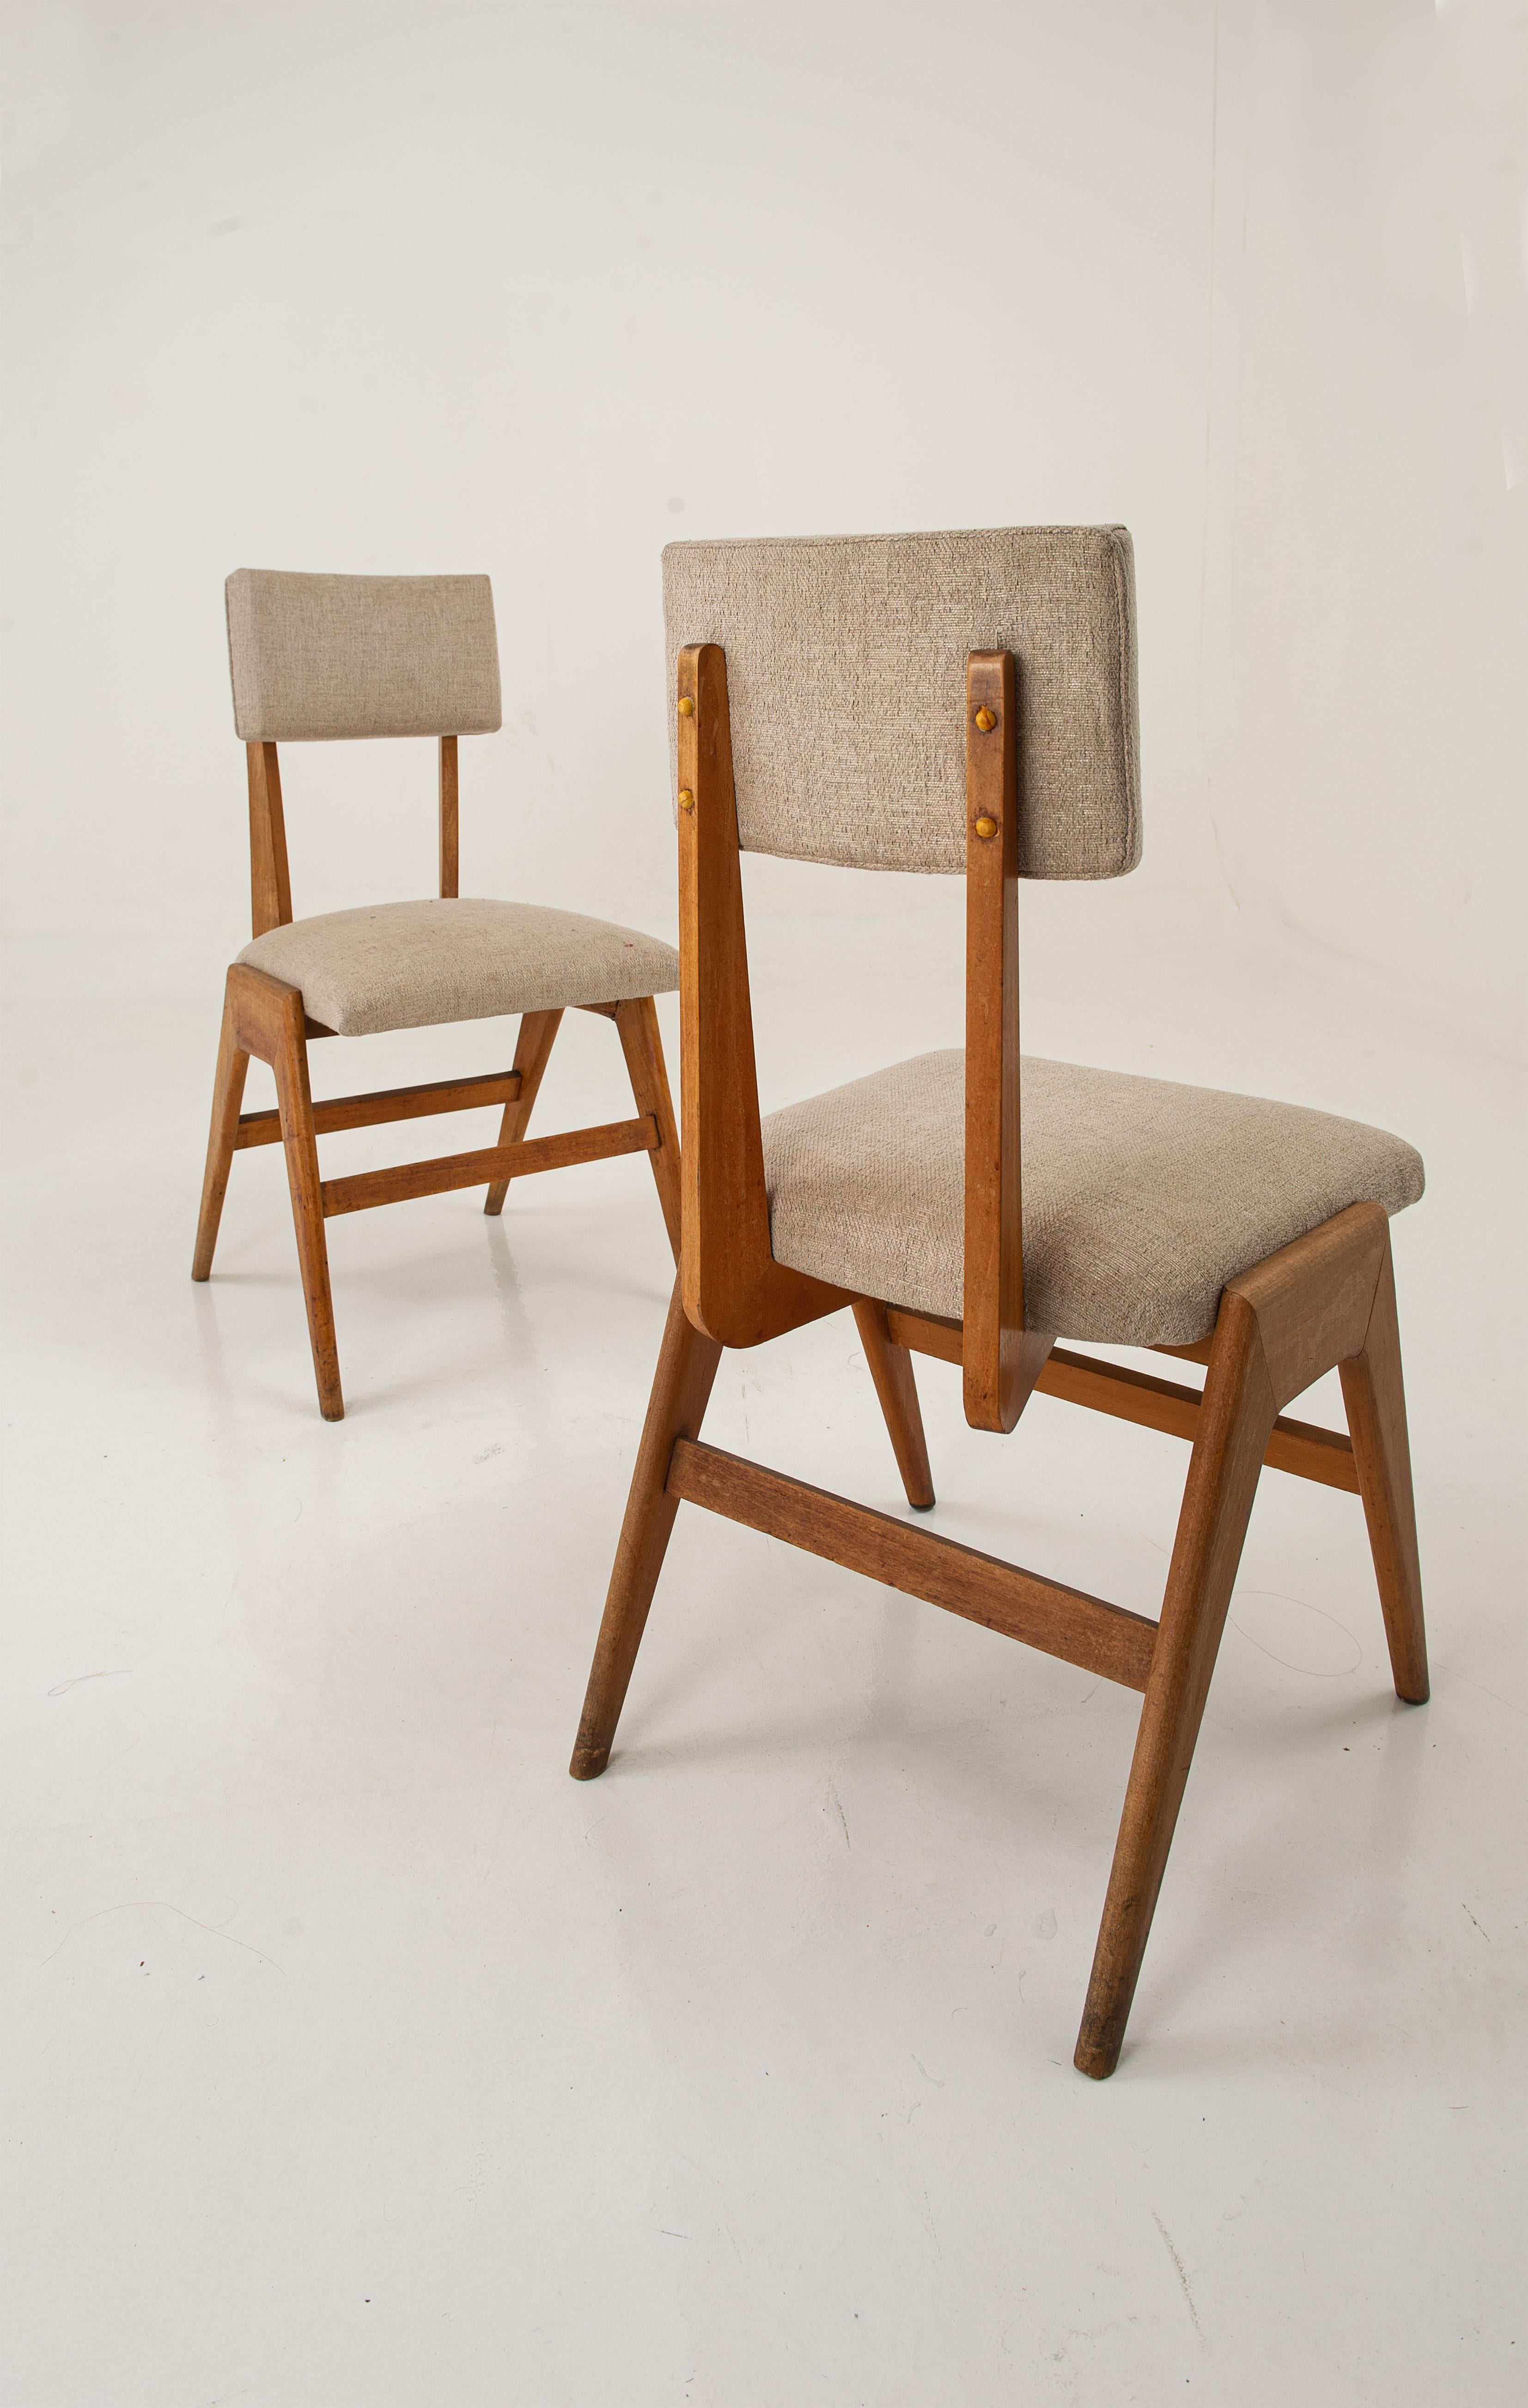 Rare set of C10 chair by Lina Bo Bardi for Studio de Arte Palma. 
The chairs were designed for the Mapa fabric importer. We have 6 chairs and one only still preserve manufacturer's label below.